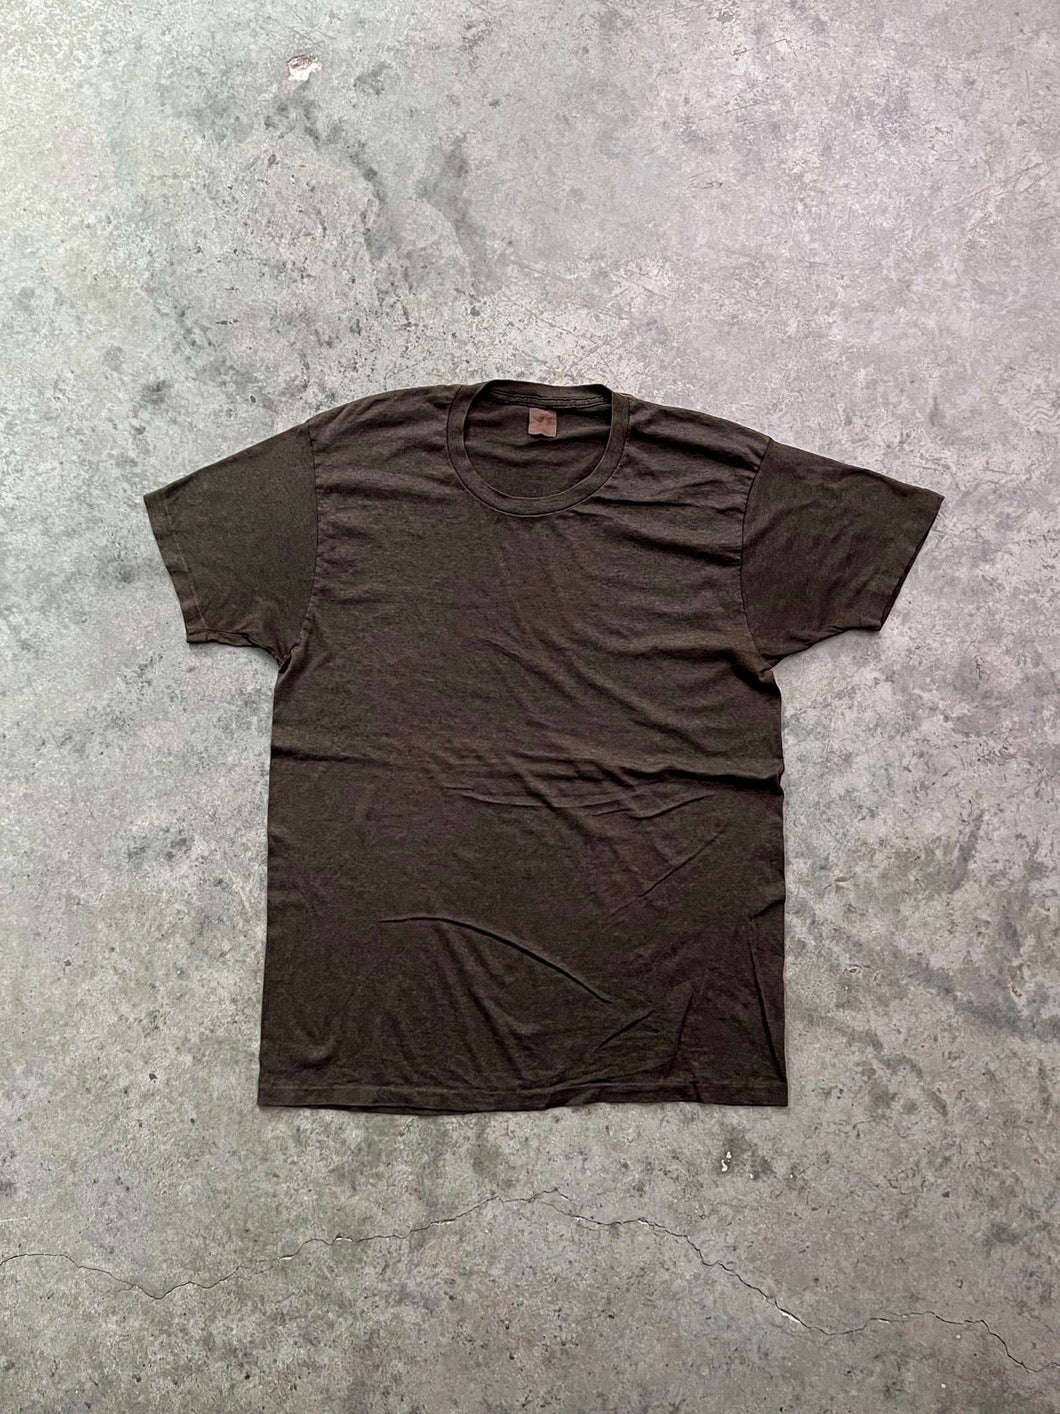 SINGLE STITCHED FADED BROWN TEE - 1980S